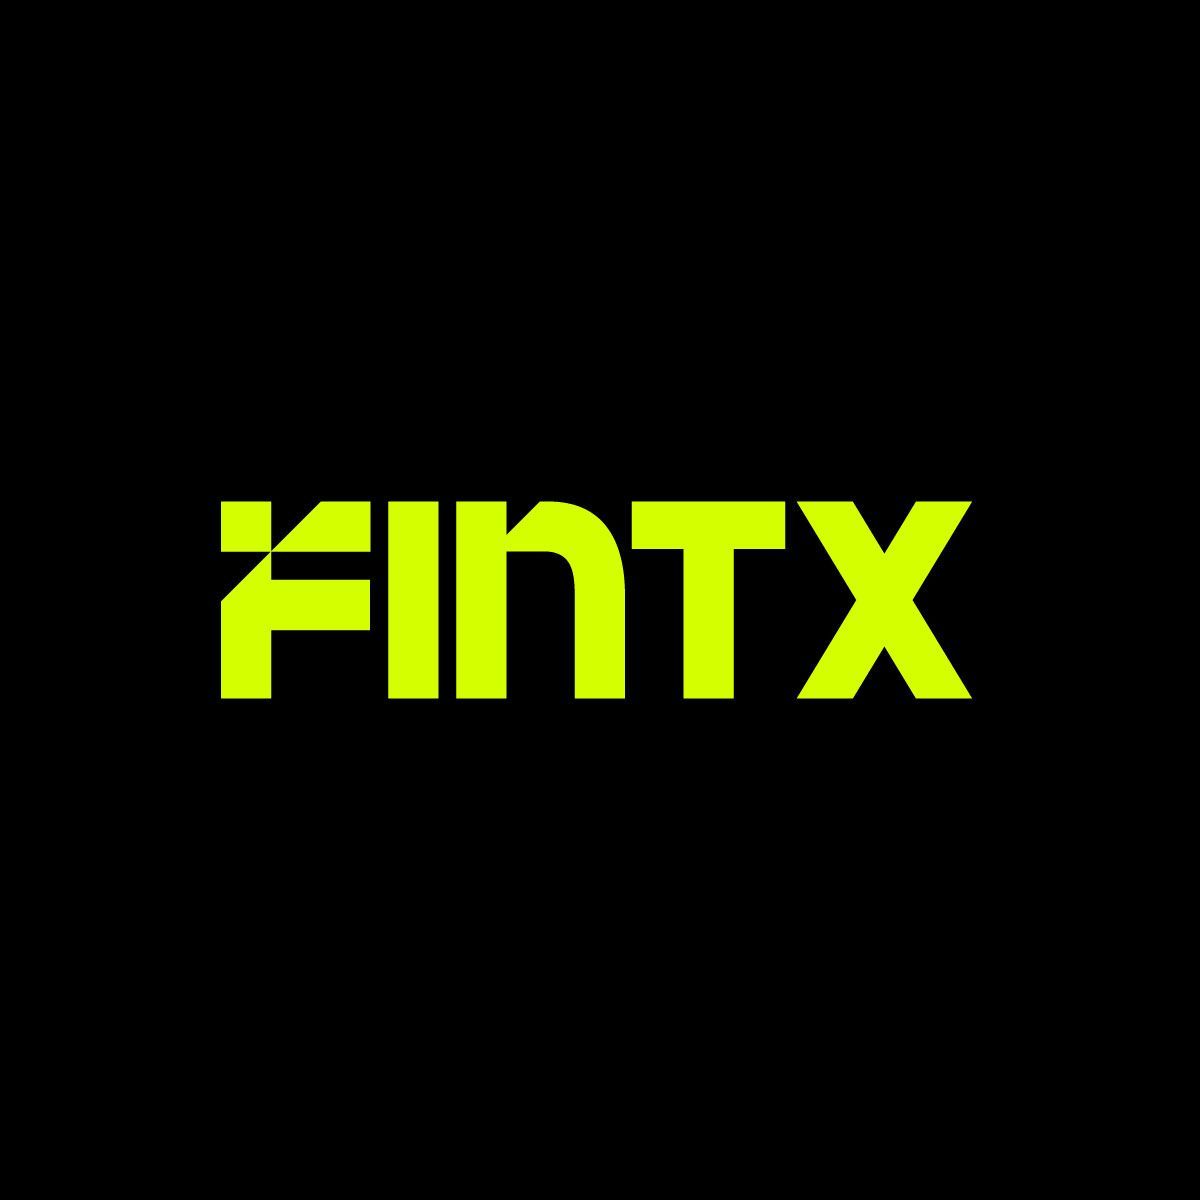 FINTX: Emirates Post Group’s latest financial technology arm